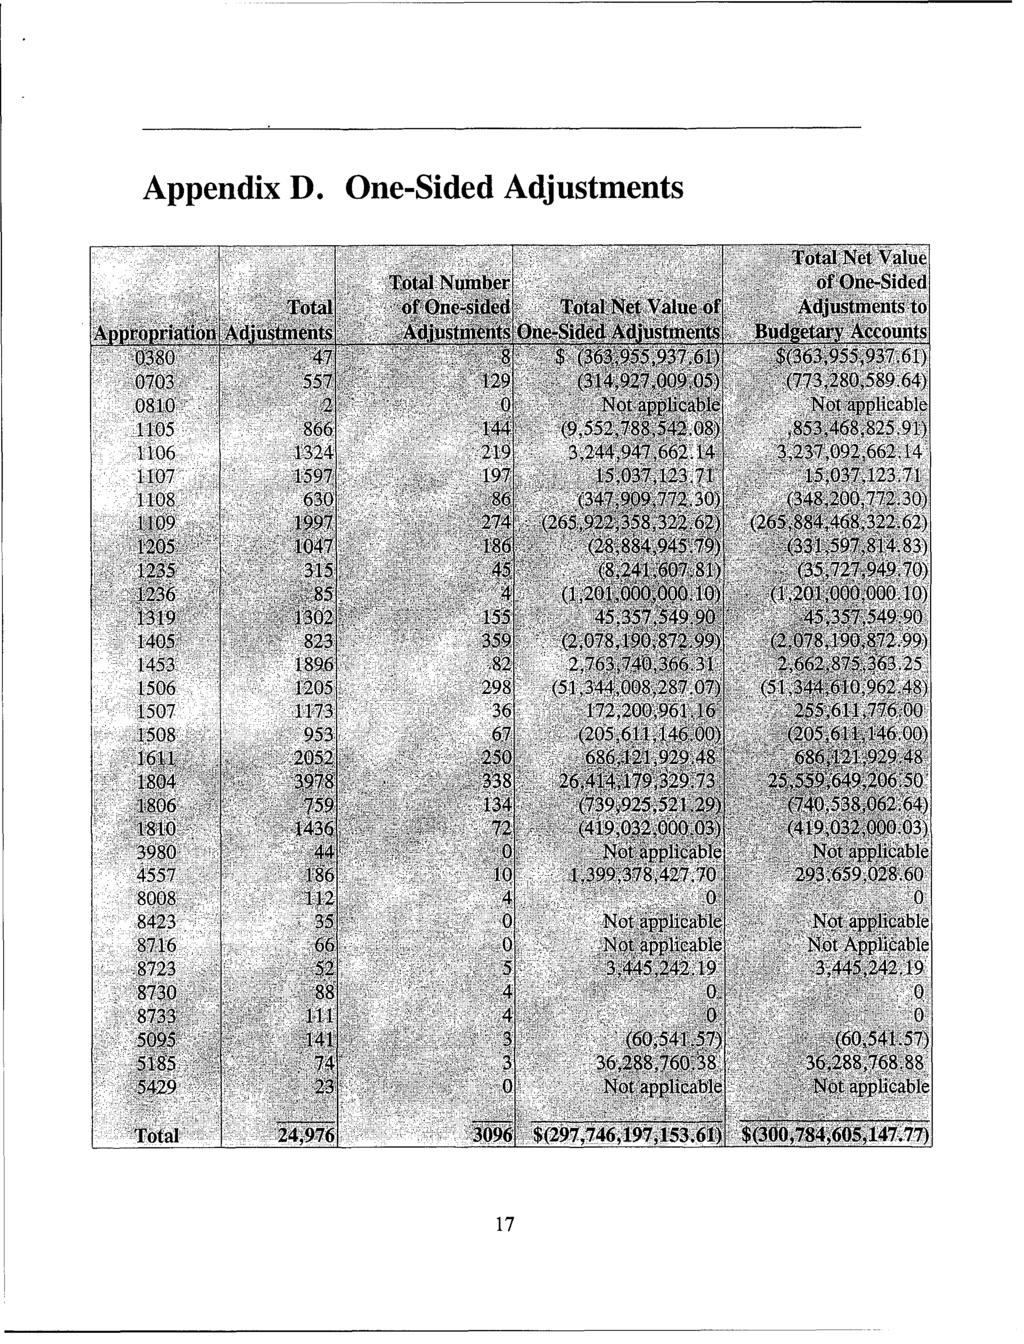 Appendix D. One-Sided Adjustments TotaiI'Net Valuel Total Numiber odono~-sided Total of One-sidd, ~Total et Value ofi Adjustments to Apo~mlratiomi Adjustmets Ad MW et s ~ue.